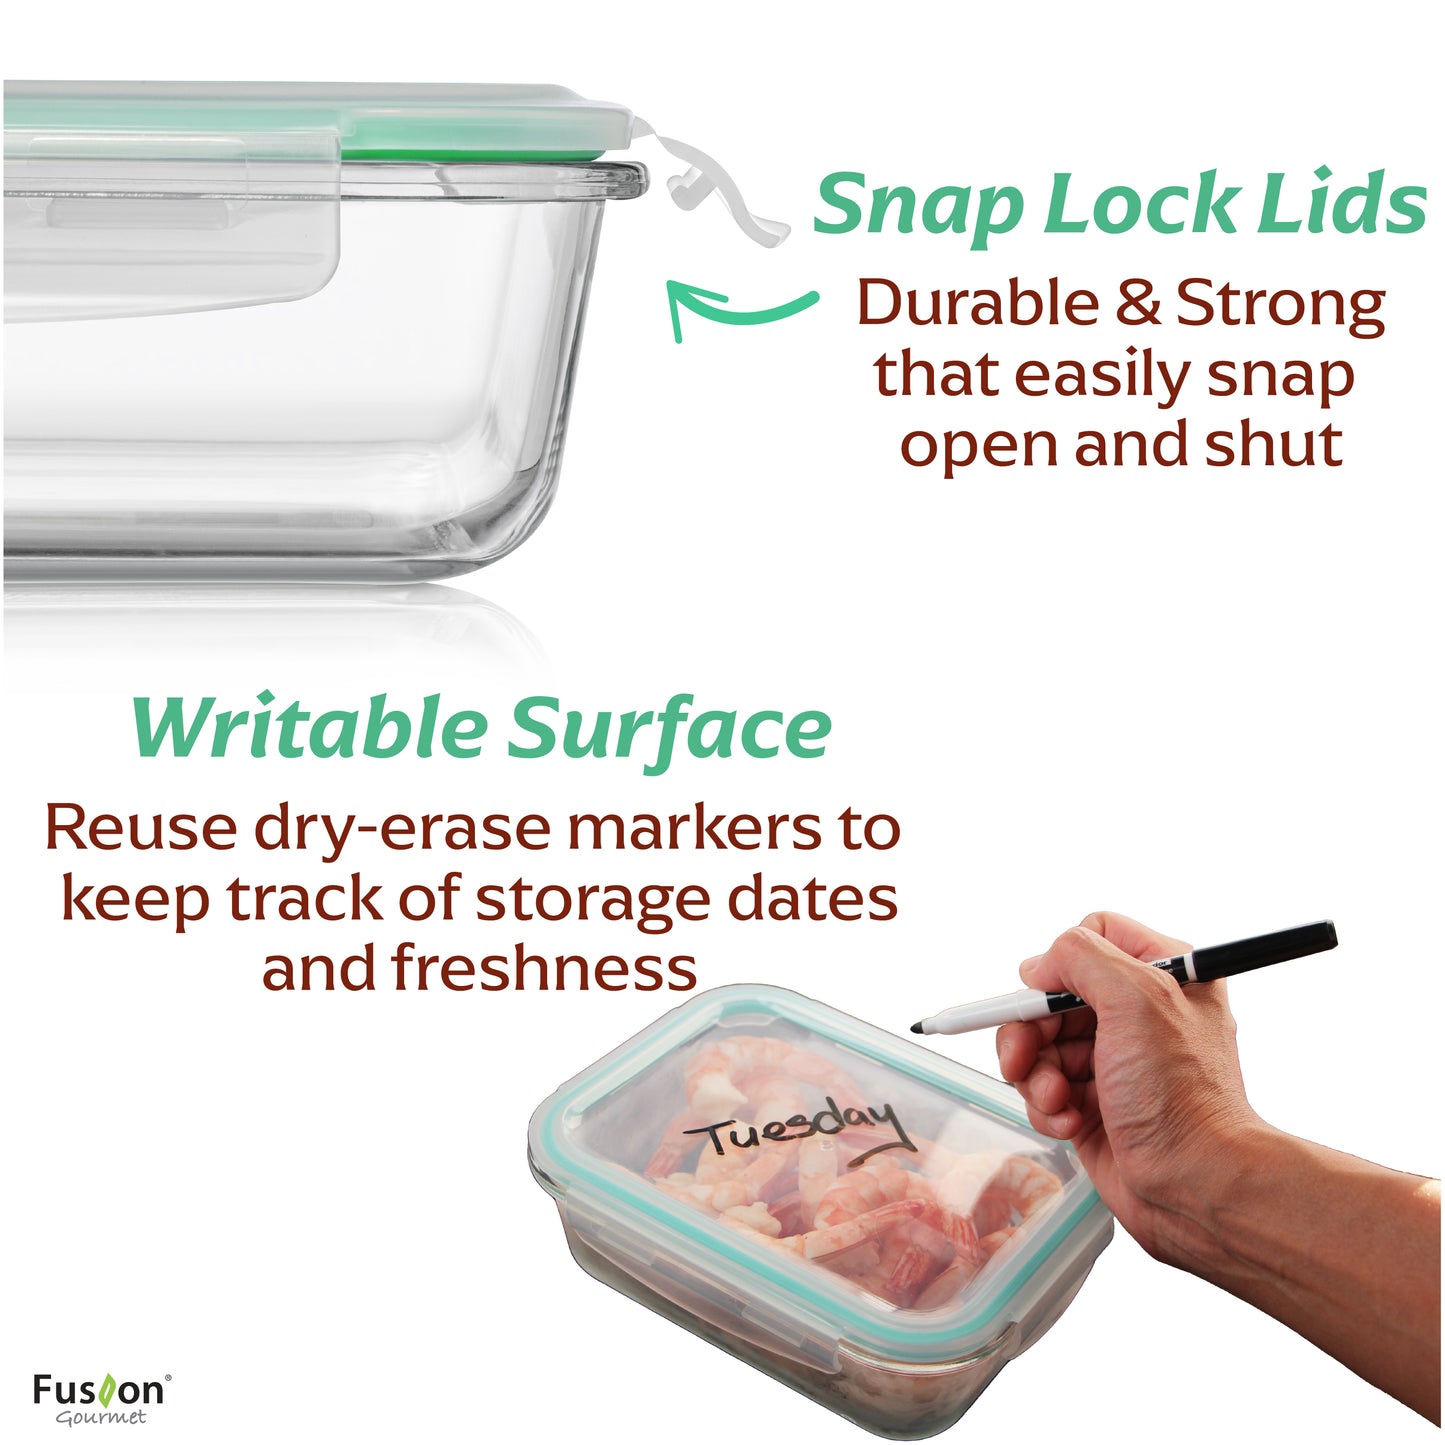 Glass Meal Prep Containers with Lids Glass Food Storage Containers with Lifetime Lasting Snap Locking Lids, Airtight Lunch Containers, Microwave, Oven